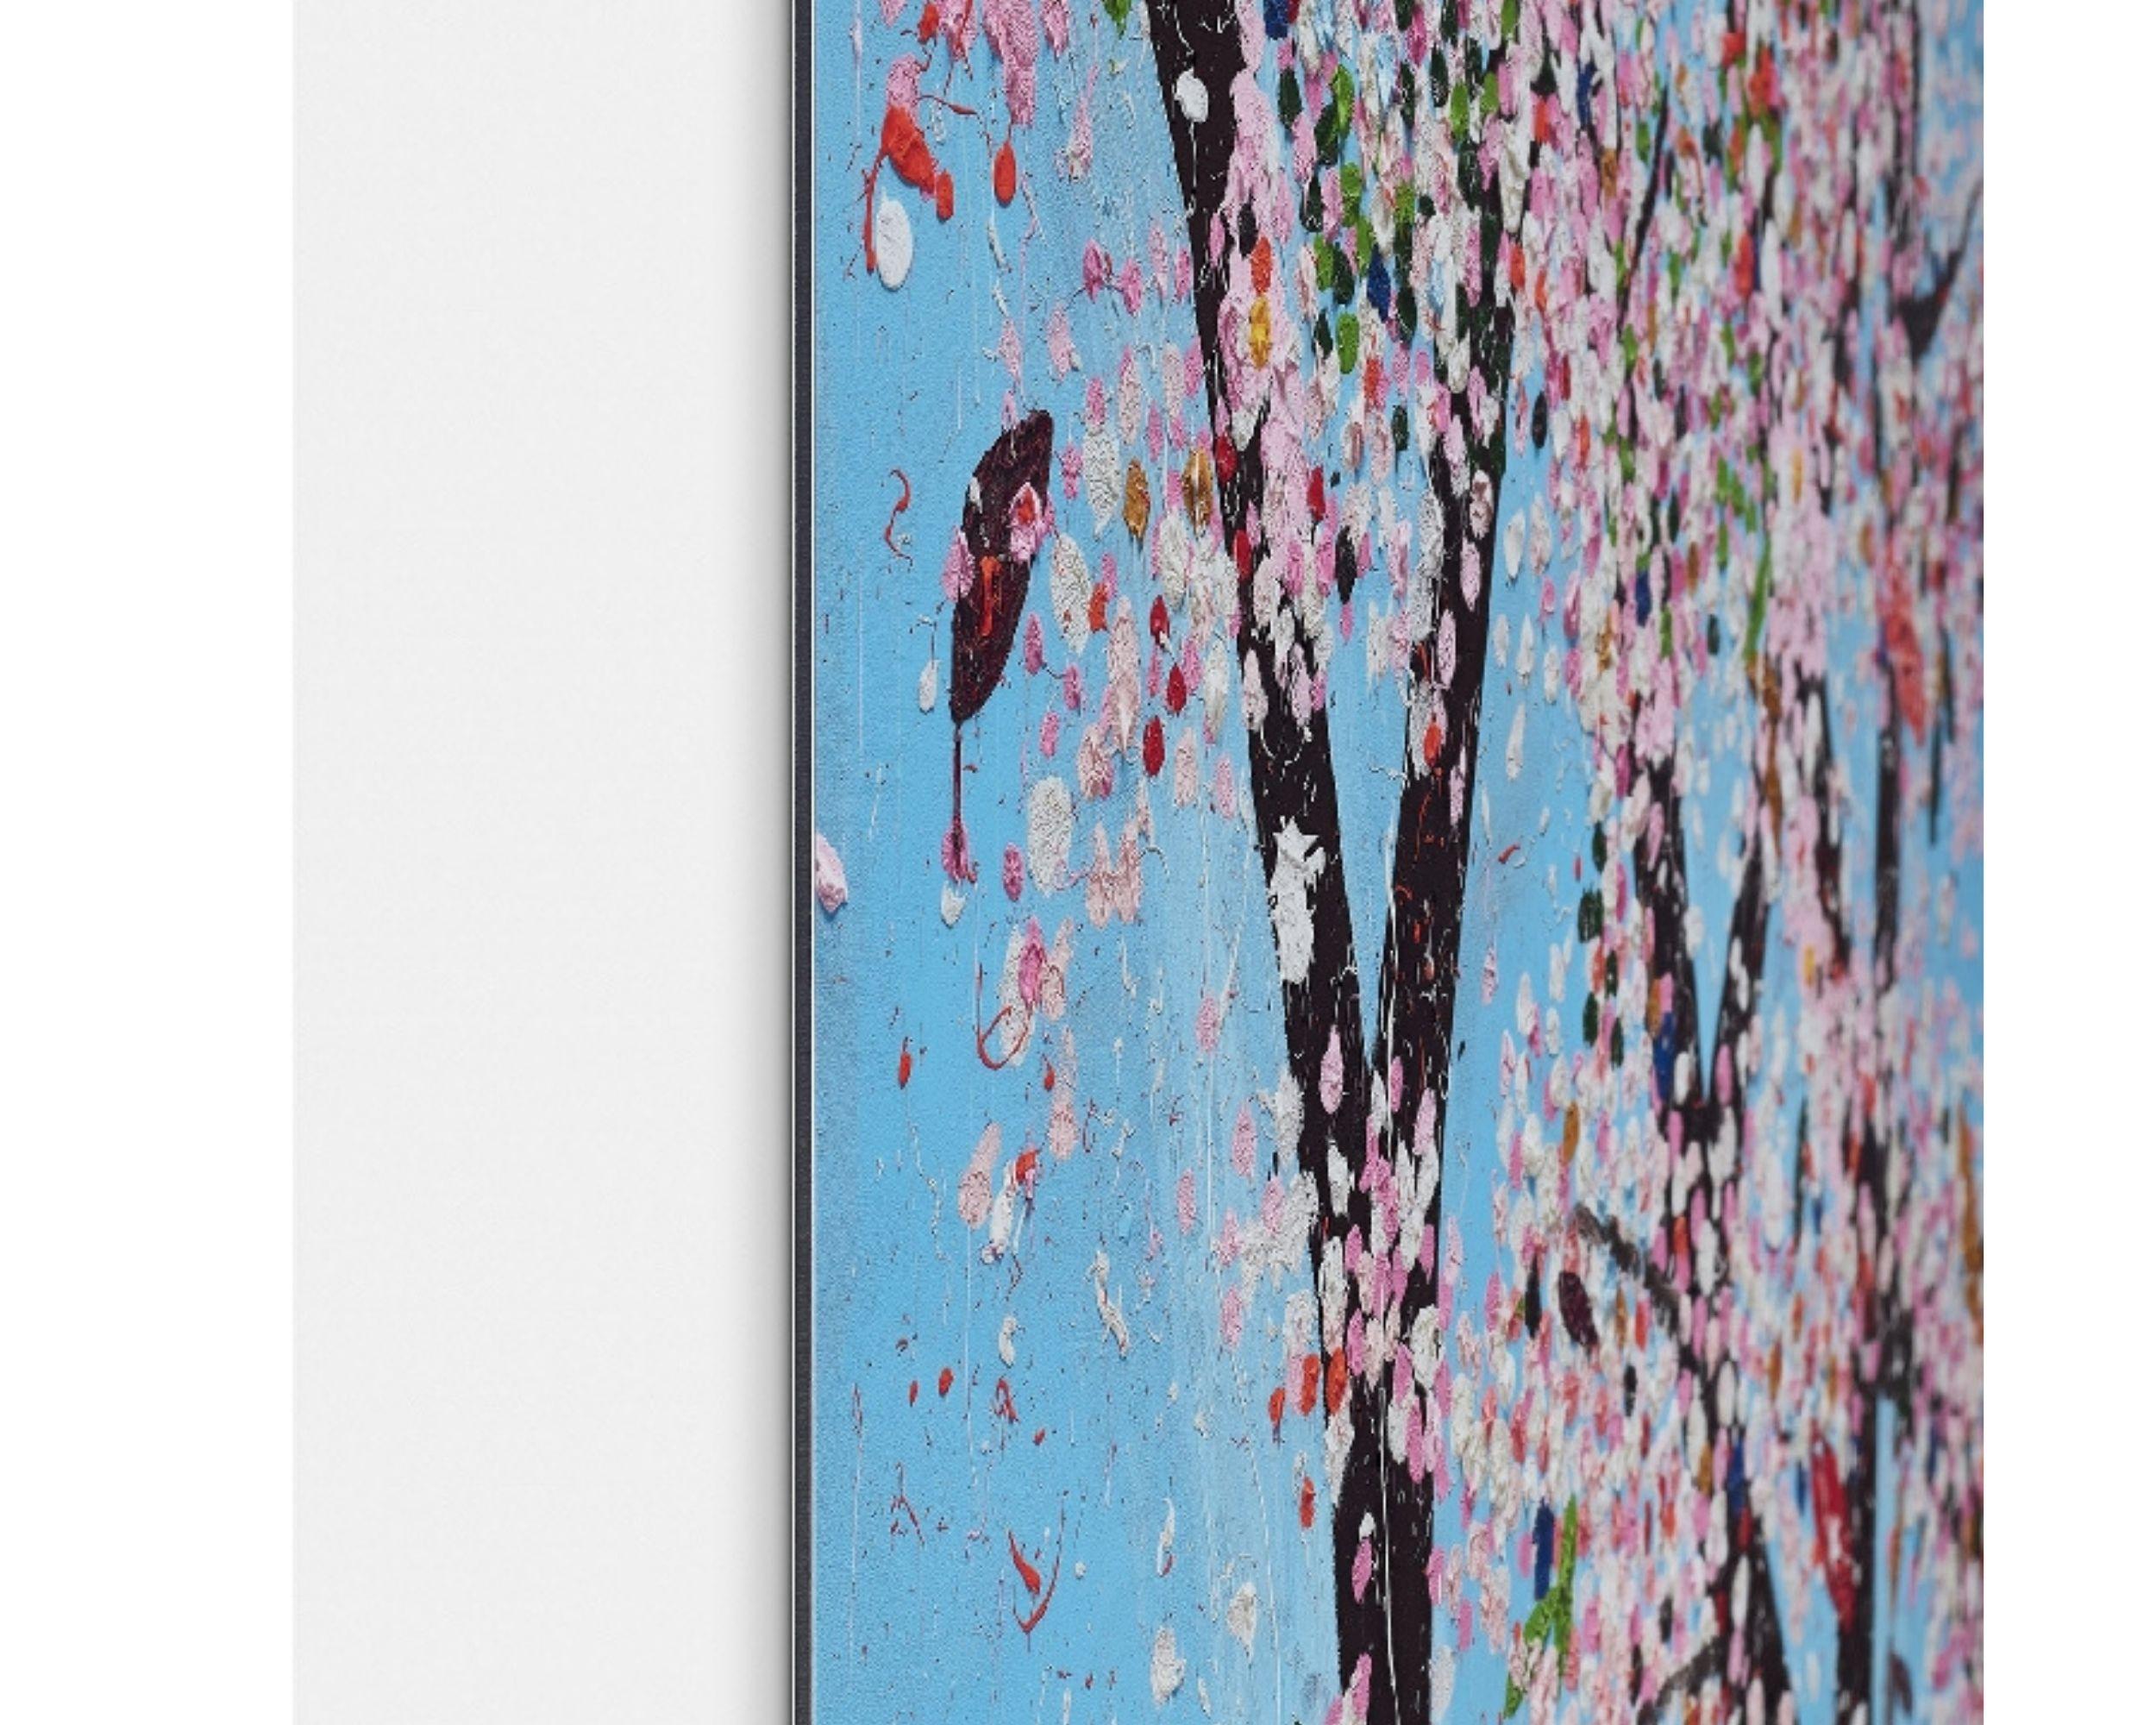 Honour -- Laminated Giclée print, The Virtues, Cherry Blossom Tree by Hirst - Print by Damien Hirst